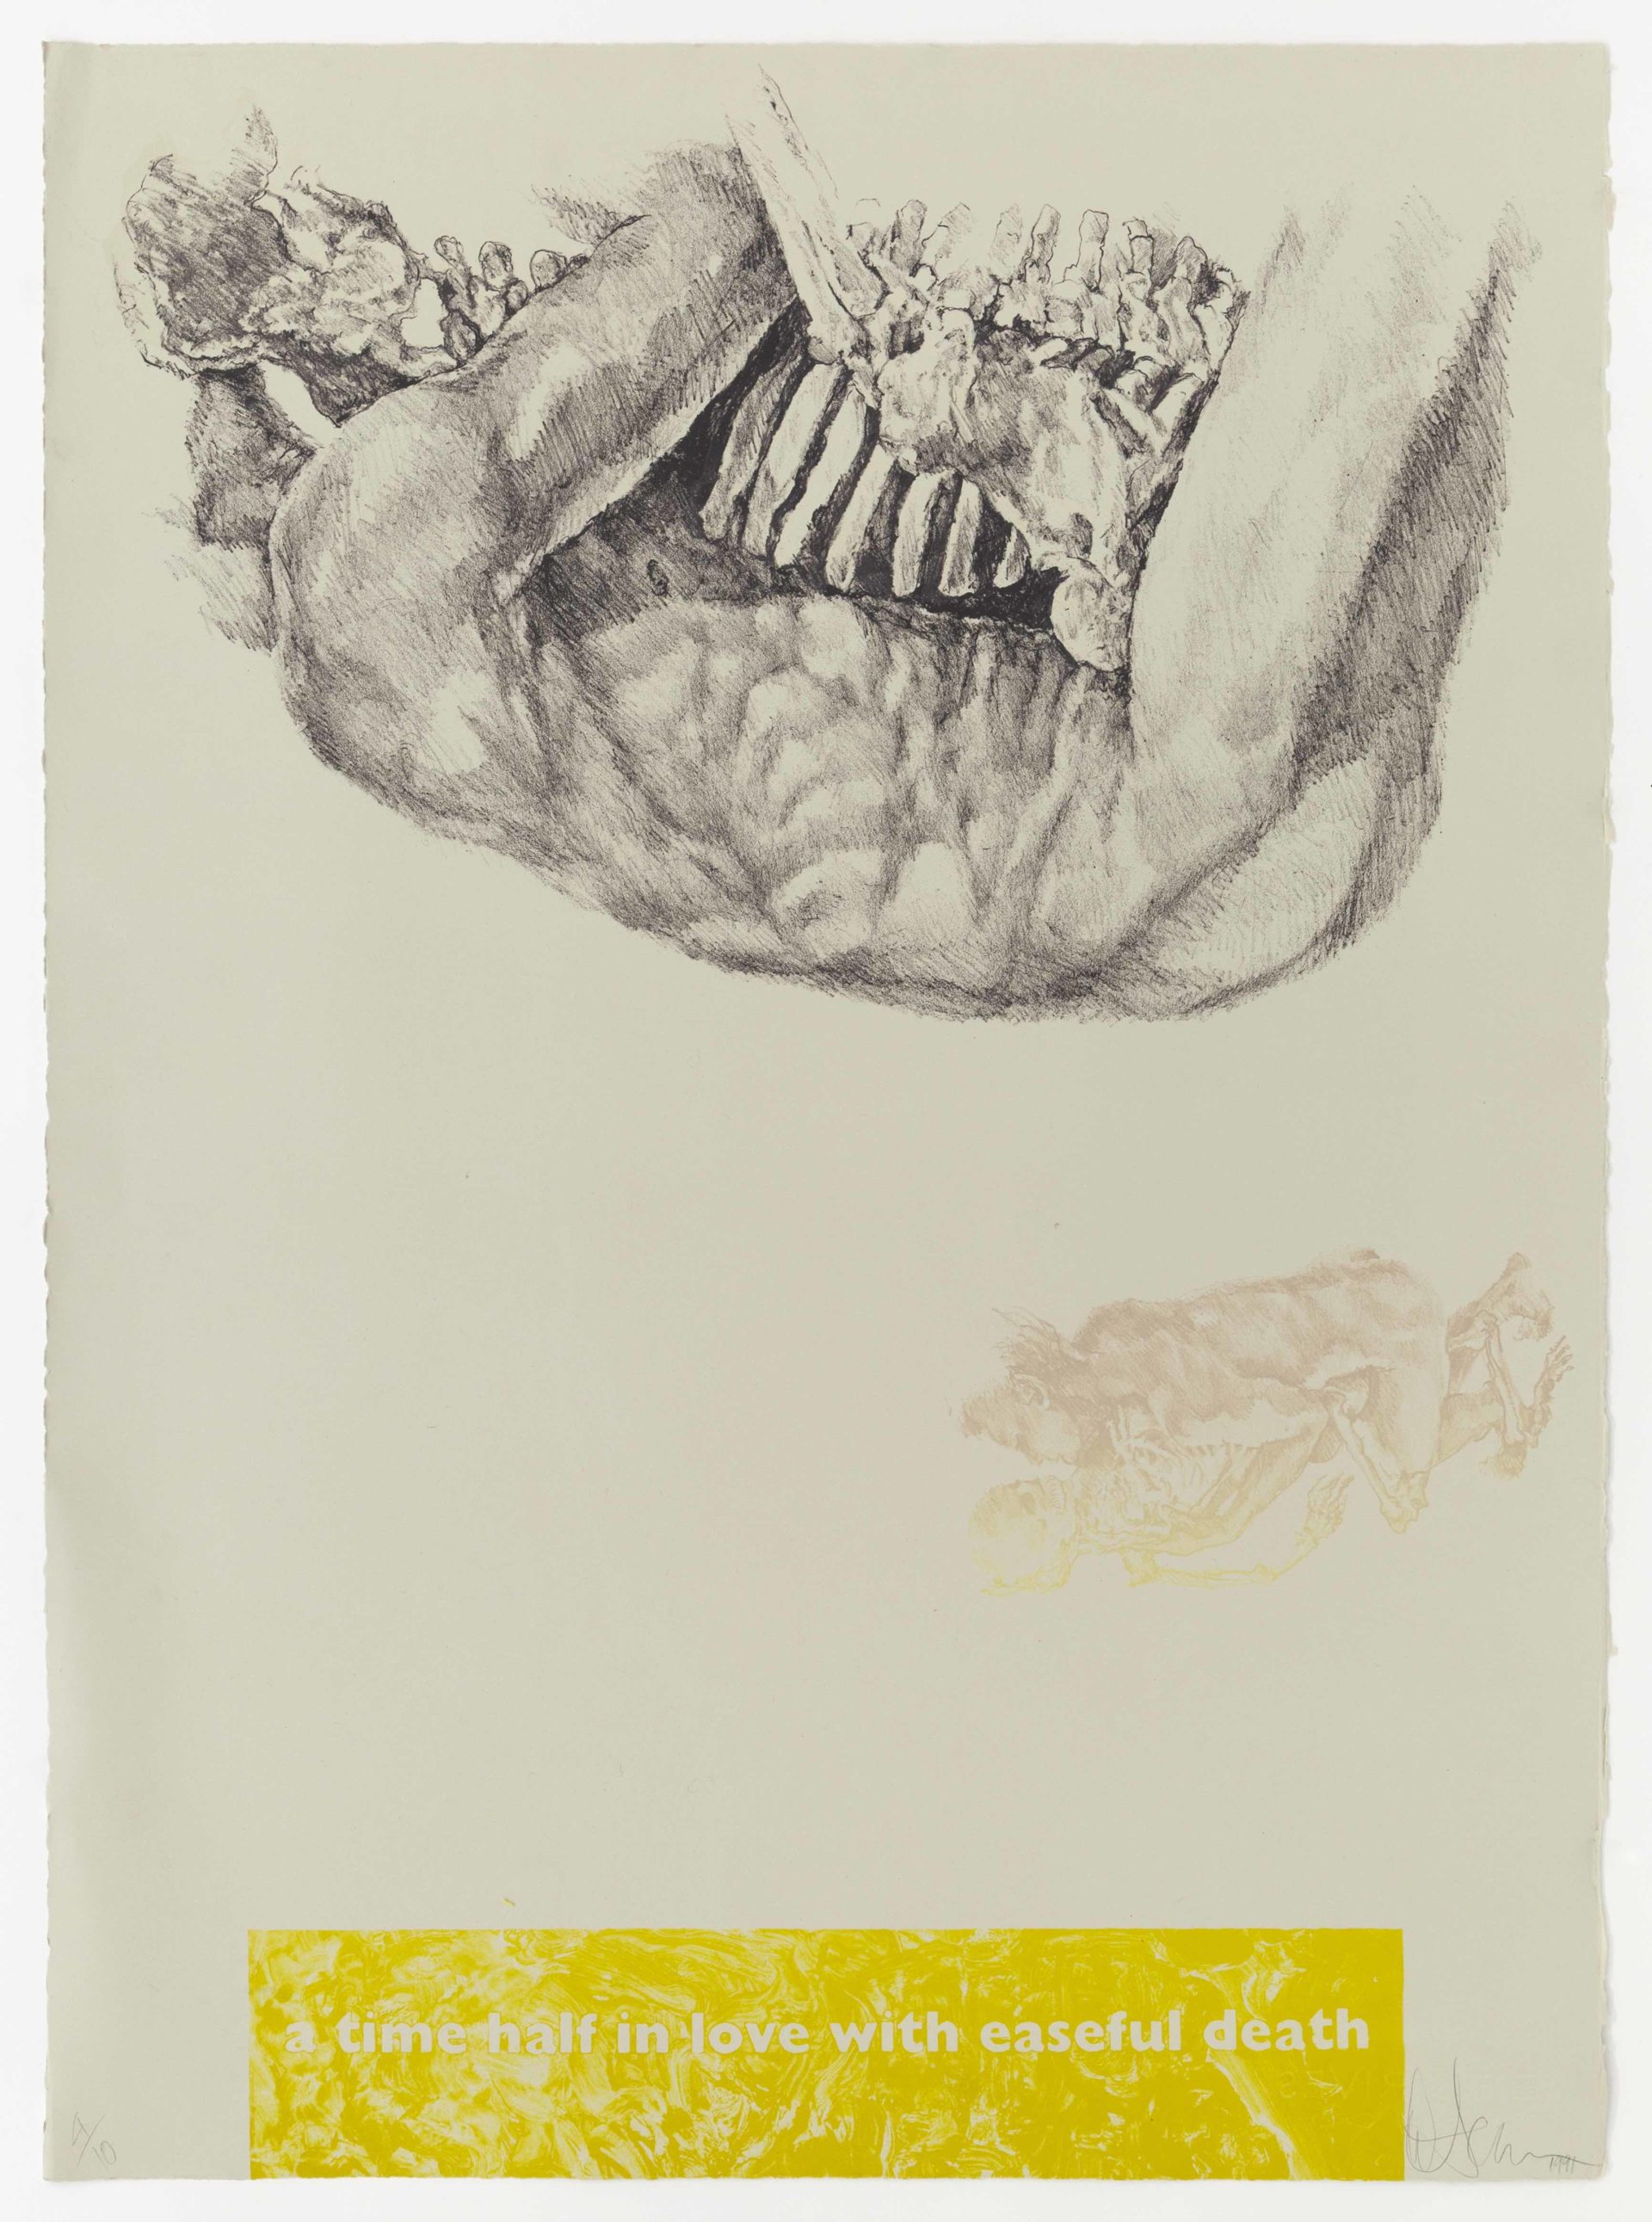 A Time Half in Love With Easeful Death, 1991, Lithograph, 30 x 22 inches (76.2 x 55.9 cm), Edition of 10